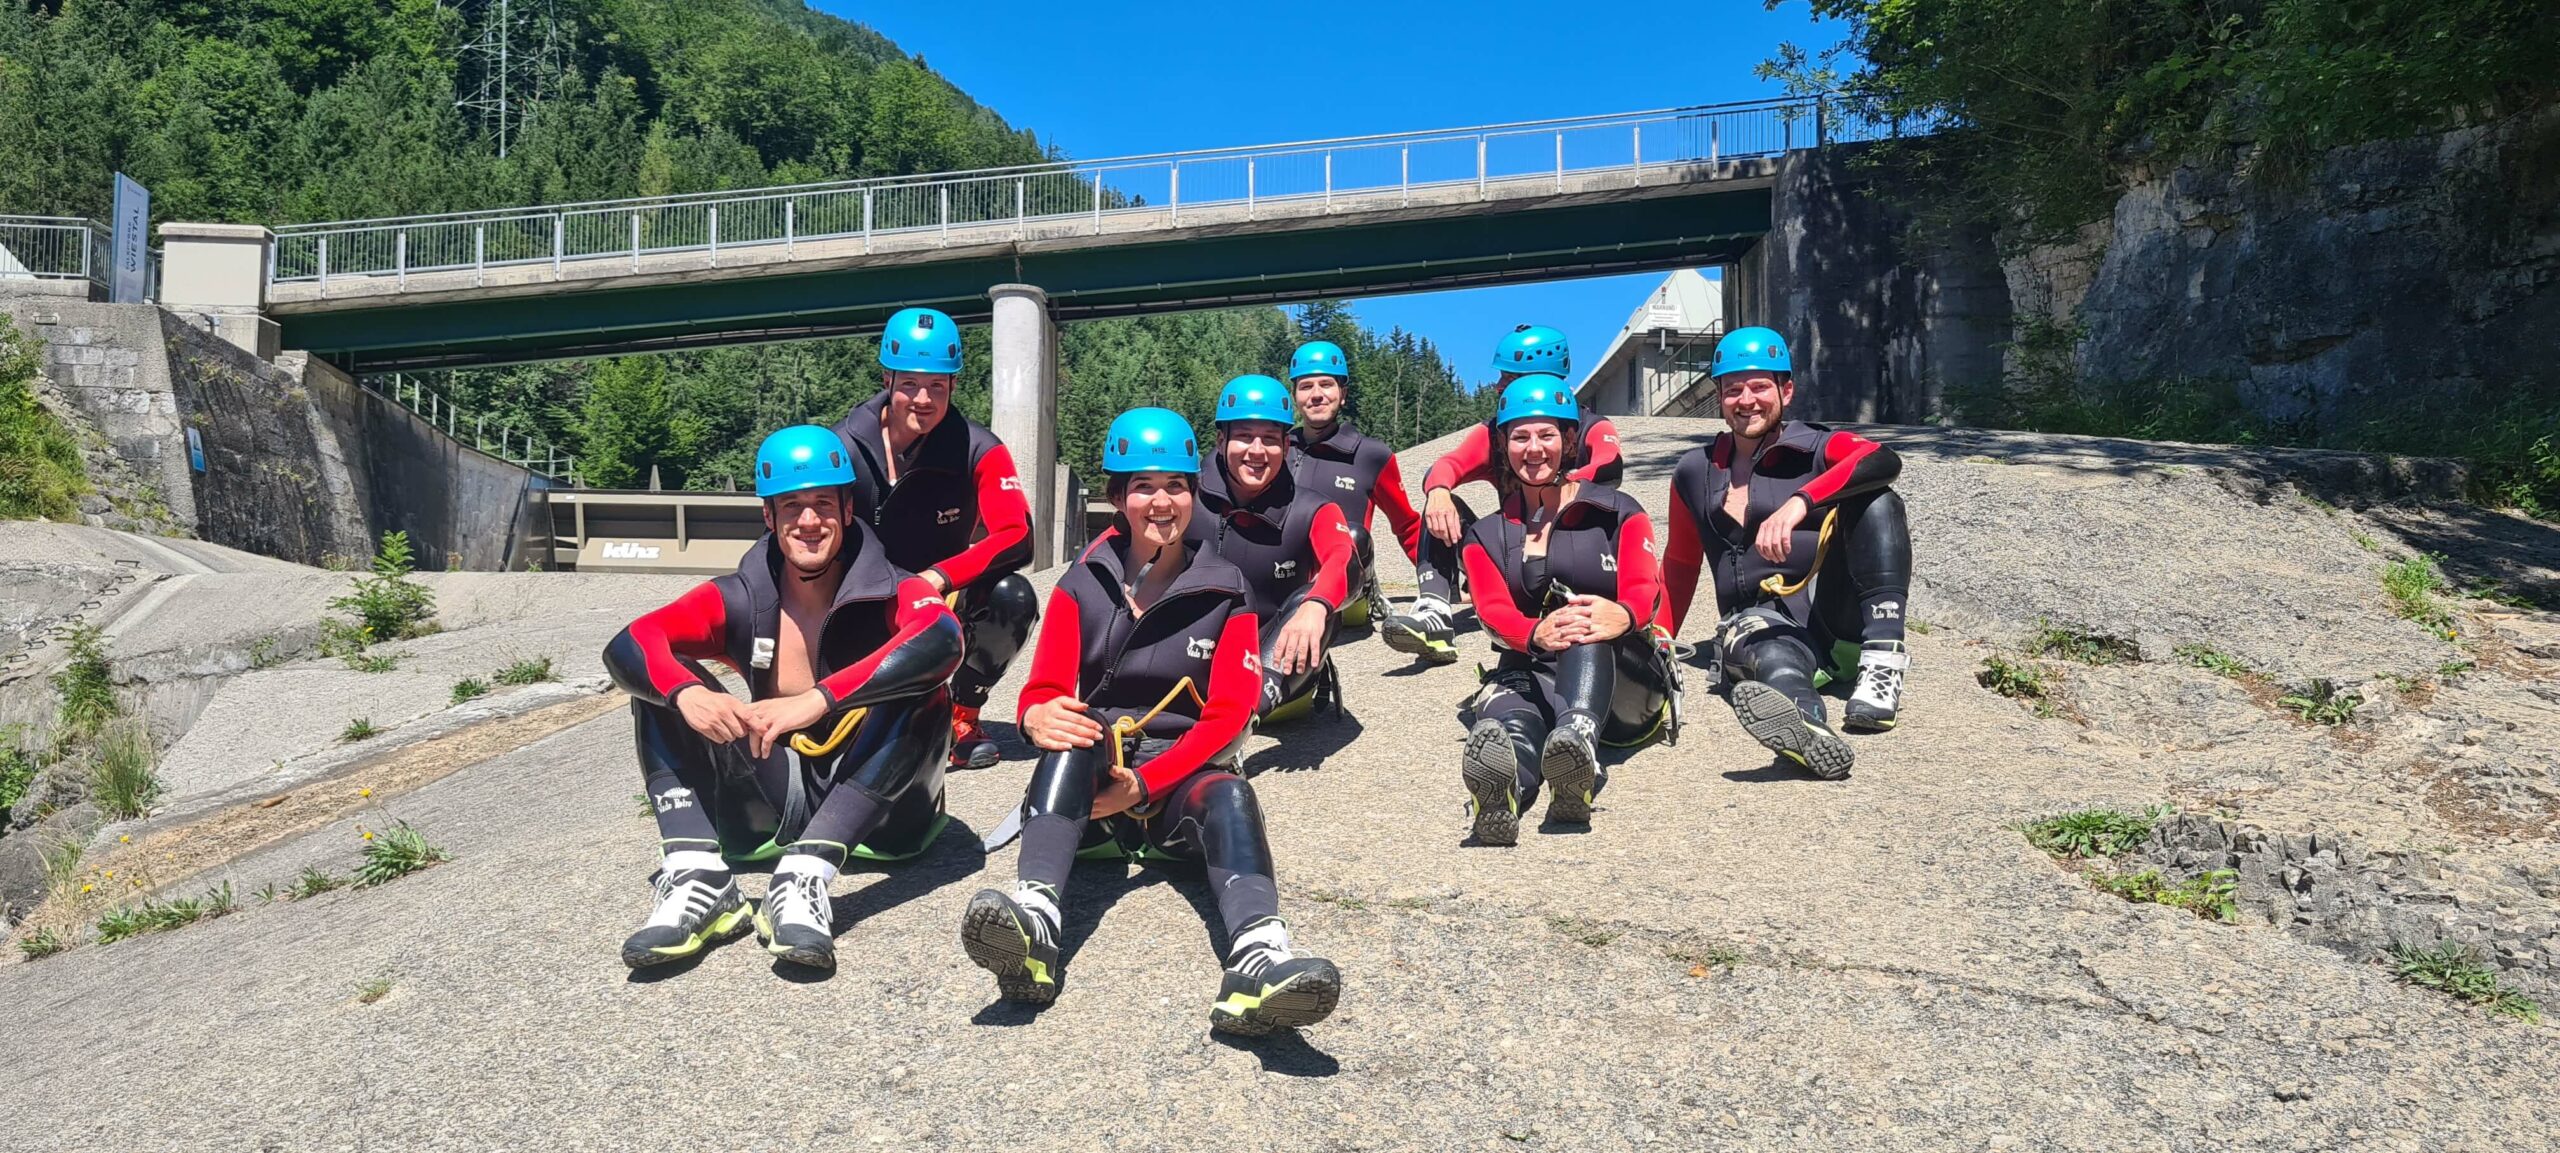 Teamevent Canyoning im Sommer 2022